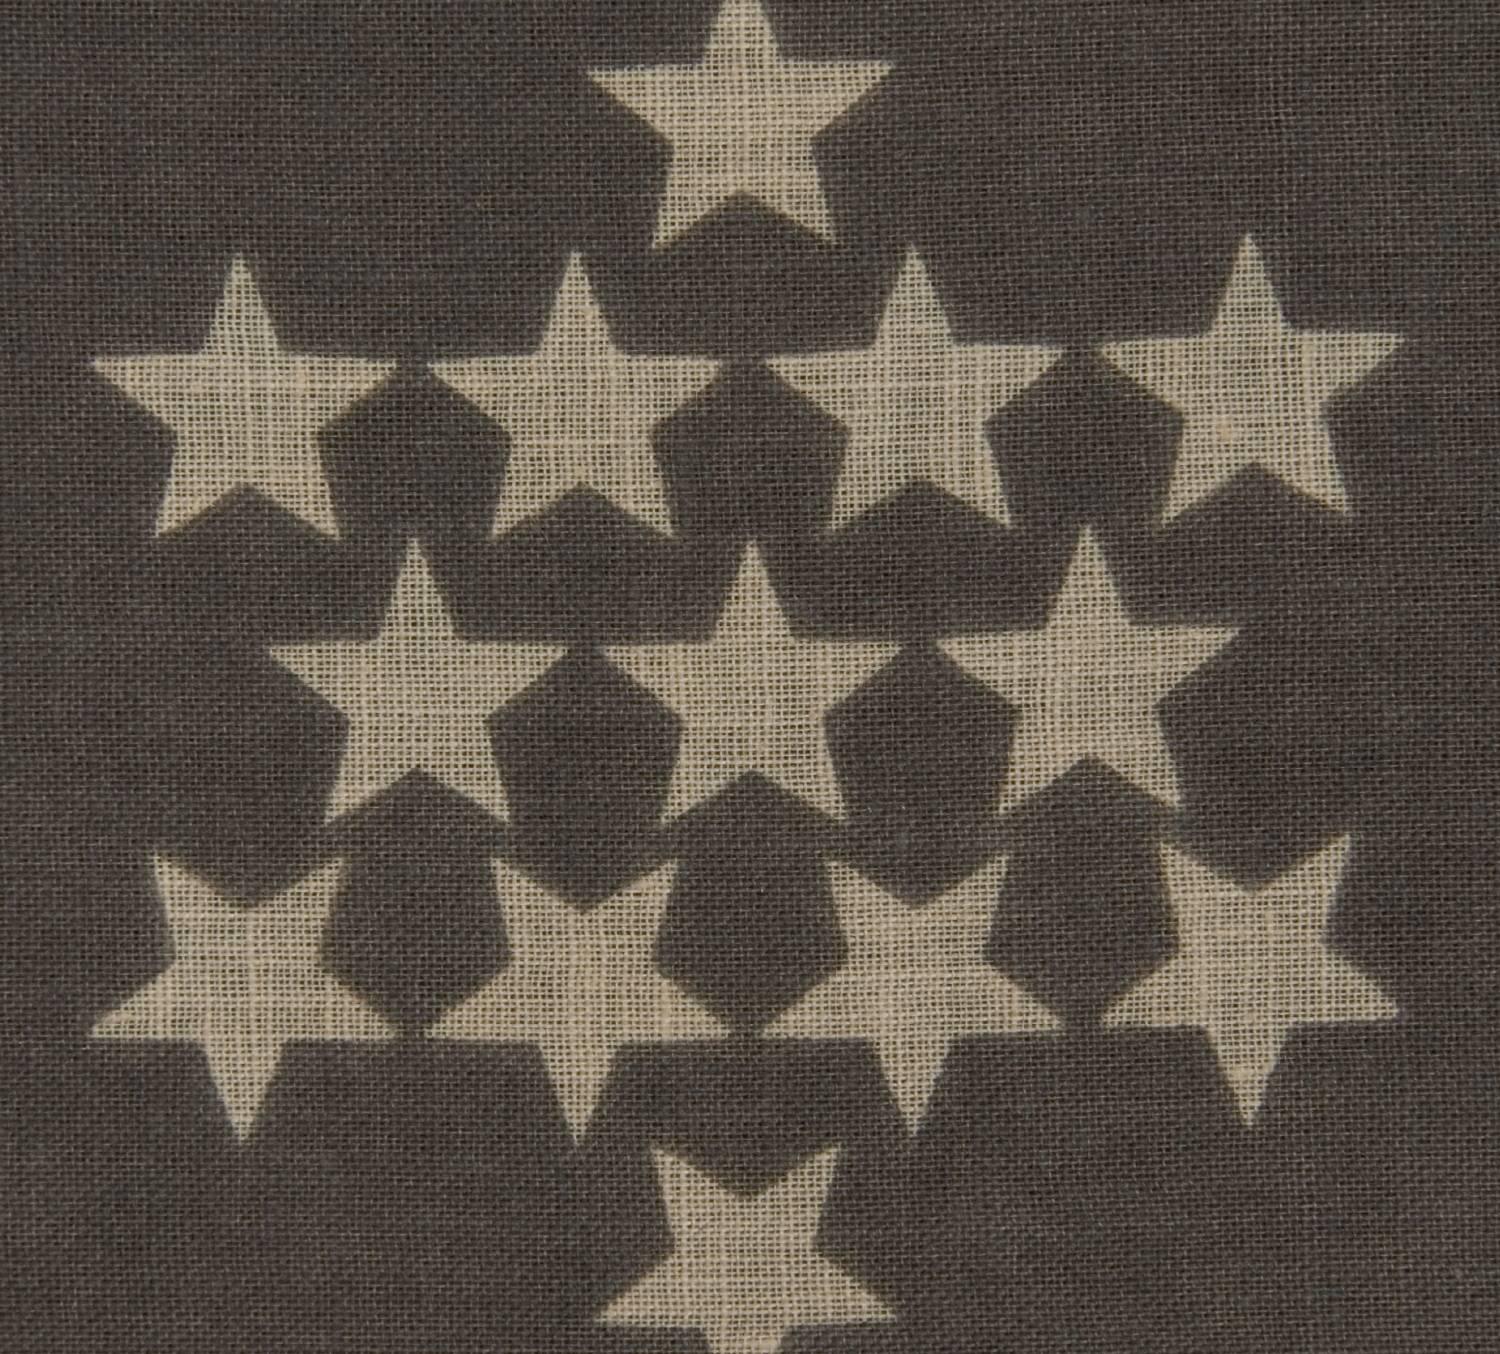 48 Stars on an Antique American Flag Designed and Commissioned by Wayne Whipple 1